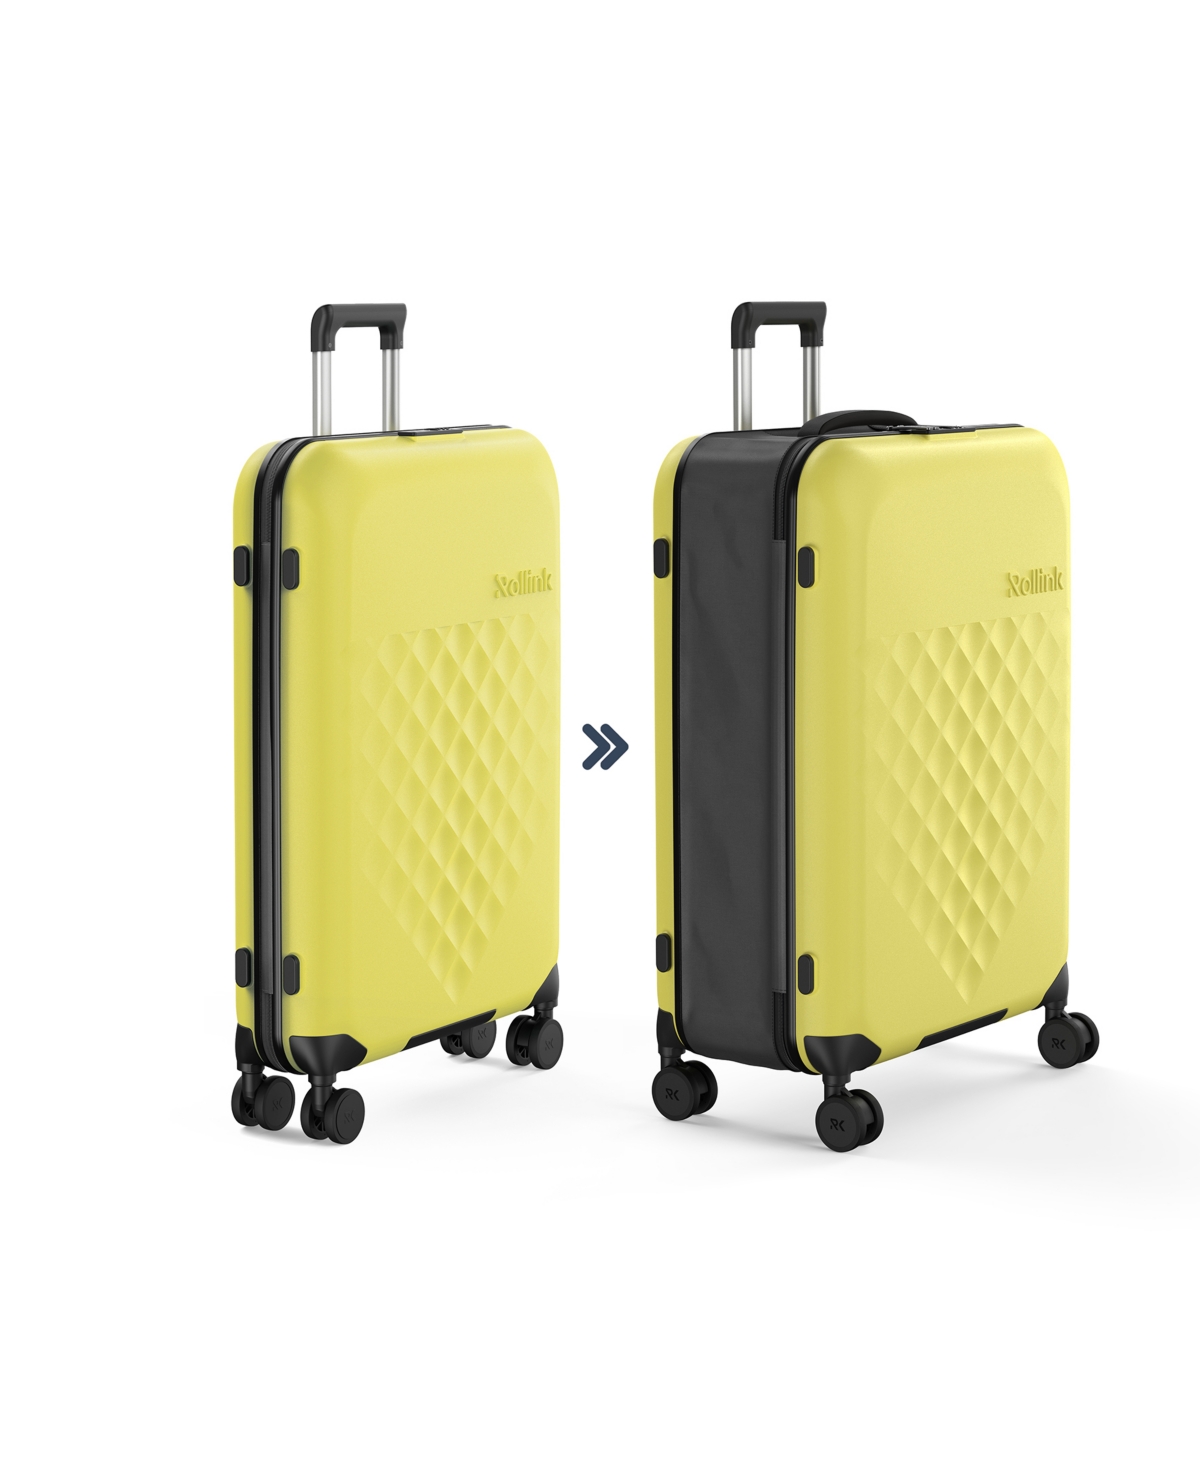 Rollink Flex 360 Large 29" Check-in Spinner Suitcase In Bright Yellow